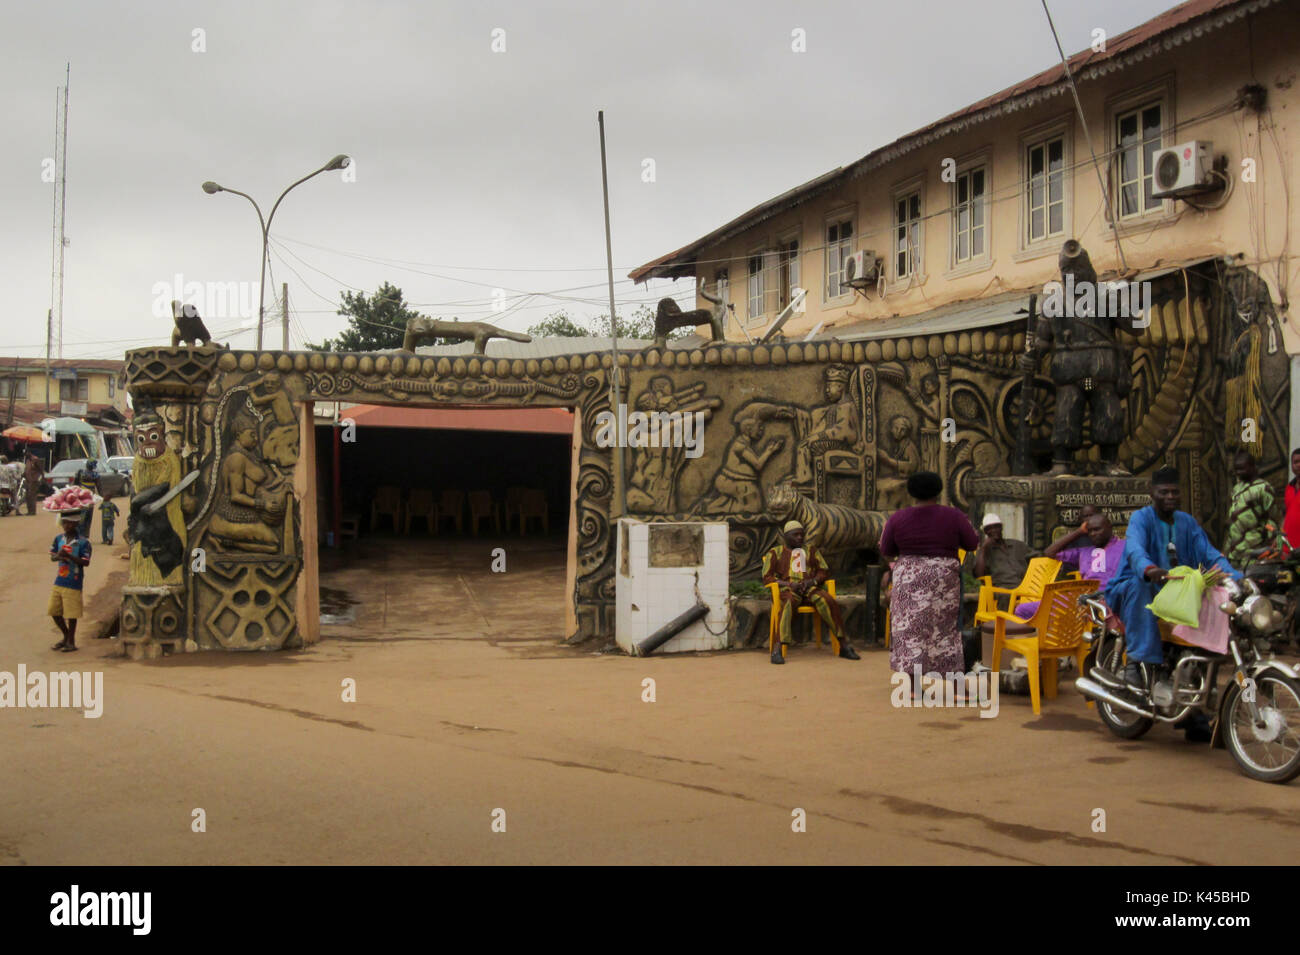 People in the street in front of a traditional building in the city of Akure, capital of Ondo State, Nigeria Stock Photo